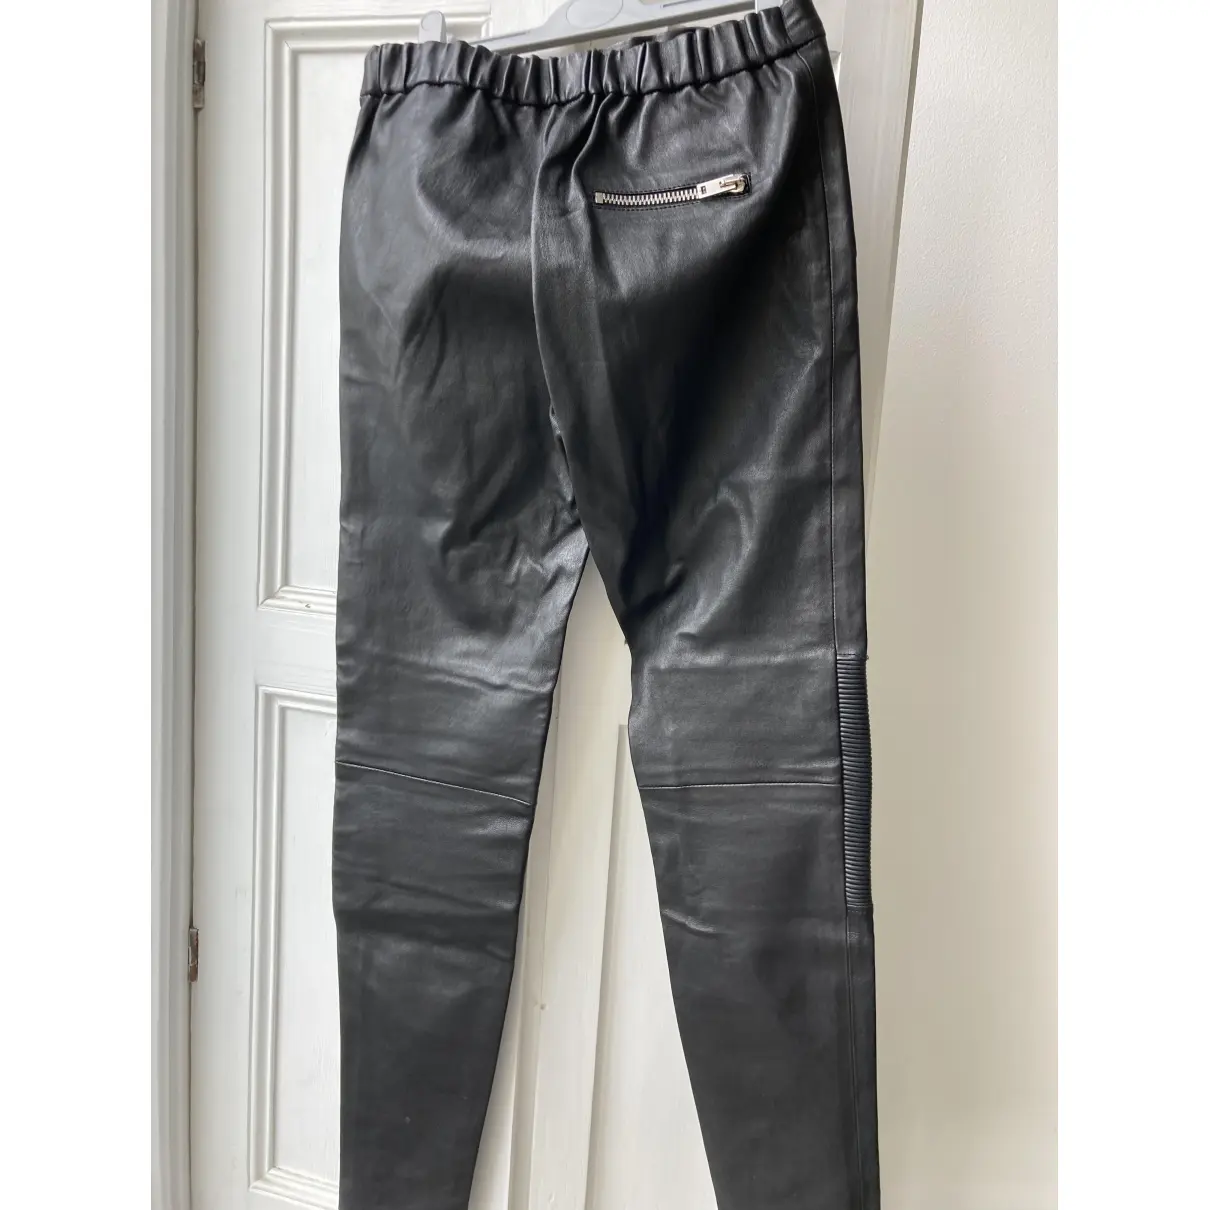 Buy Joseph Leather trousers online